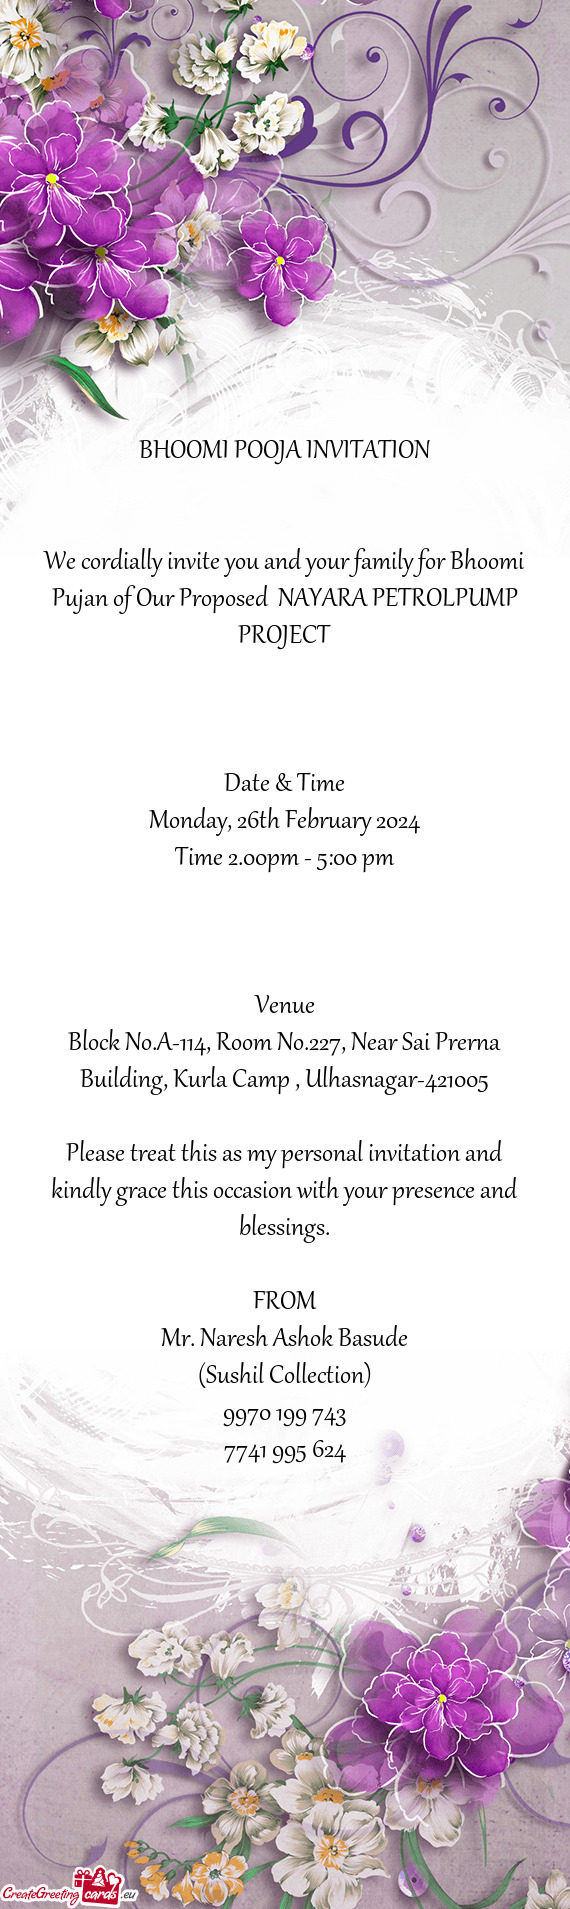 We cordially invite you and your family for Bhoomi Pujan of Our Proposed NAYARA PETROLPUMP PROJECT